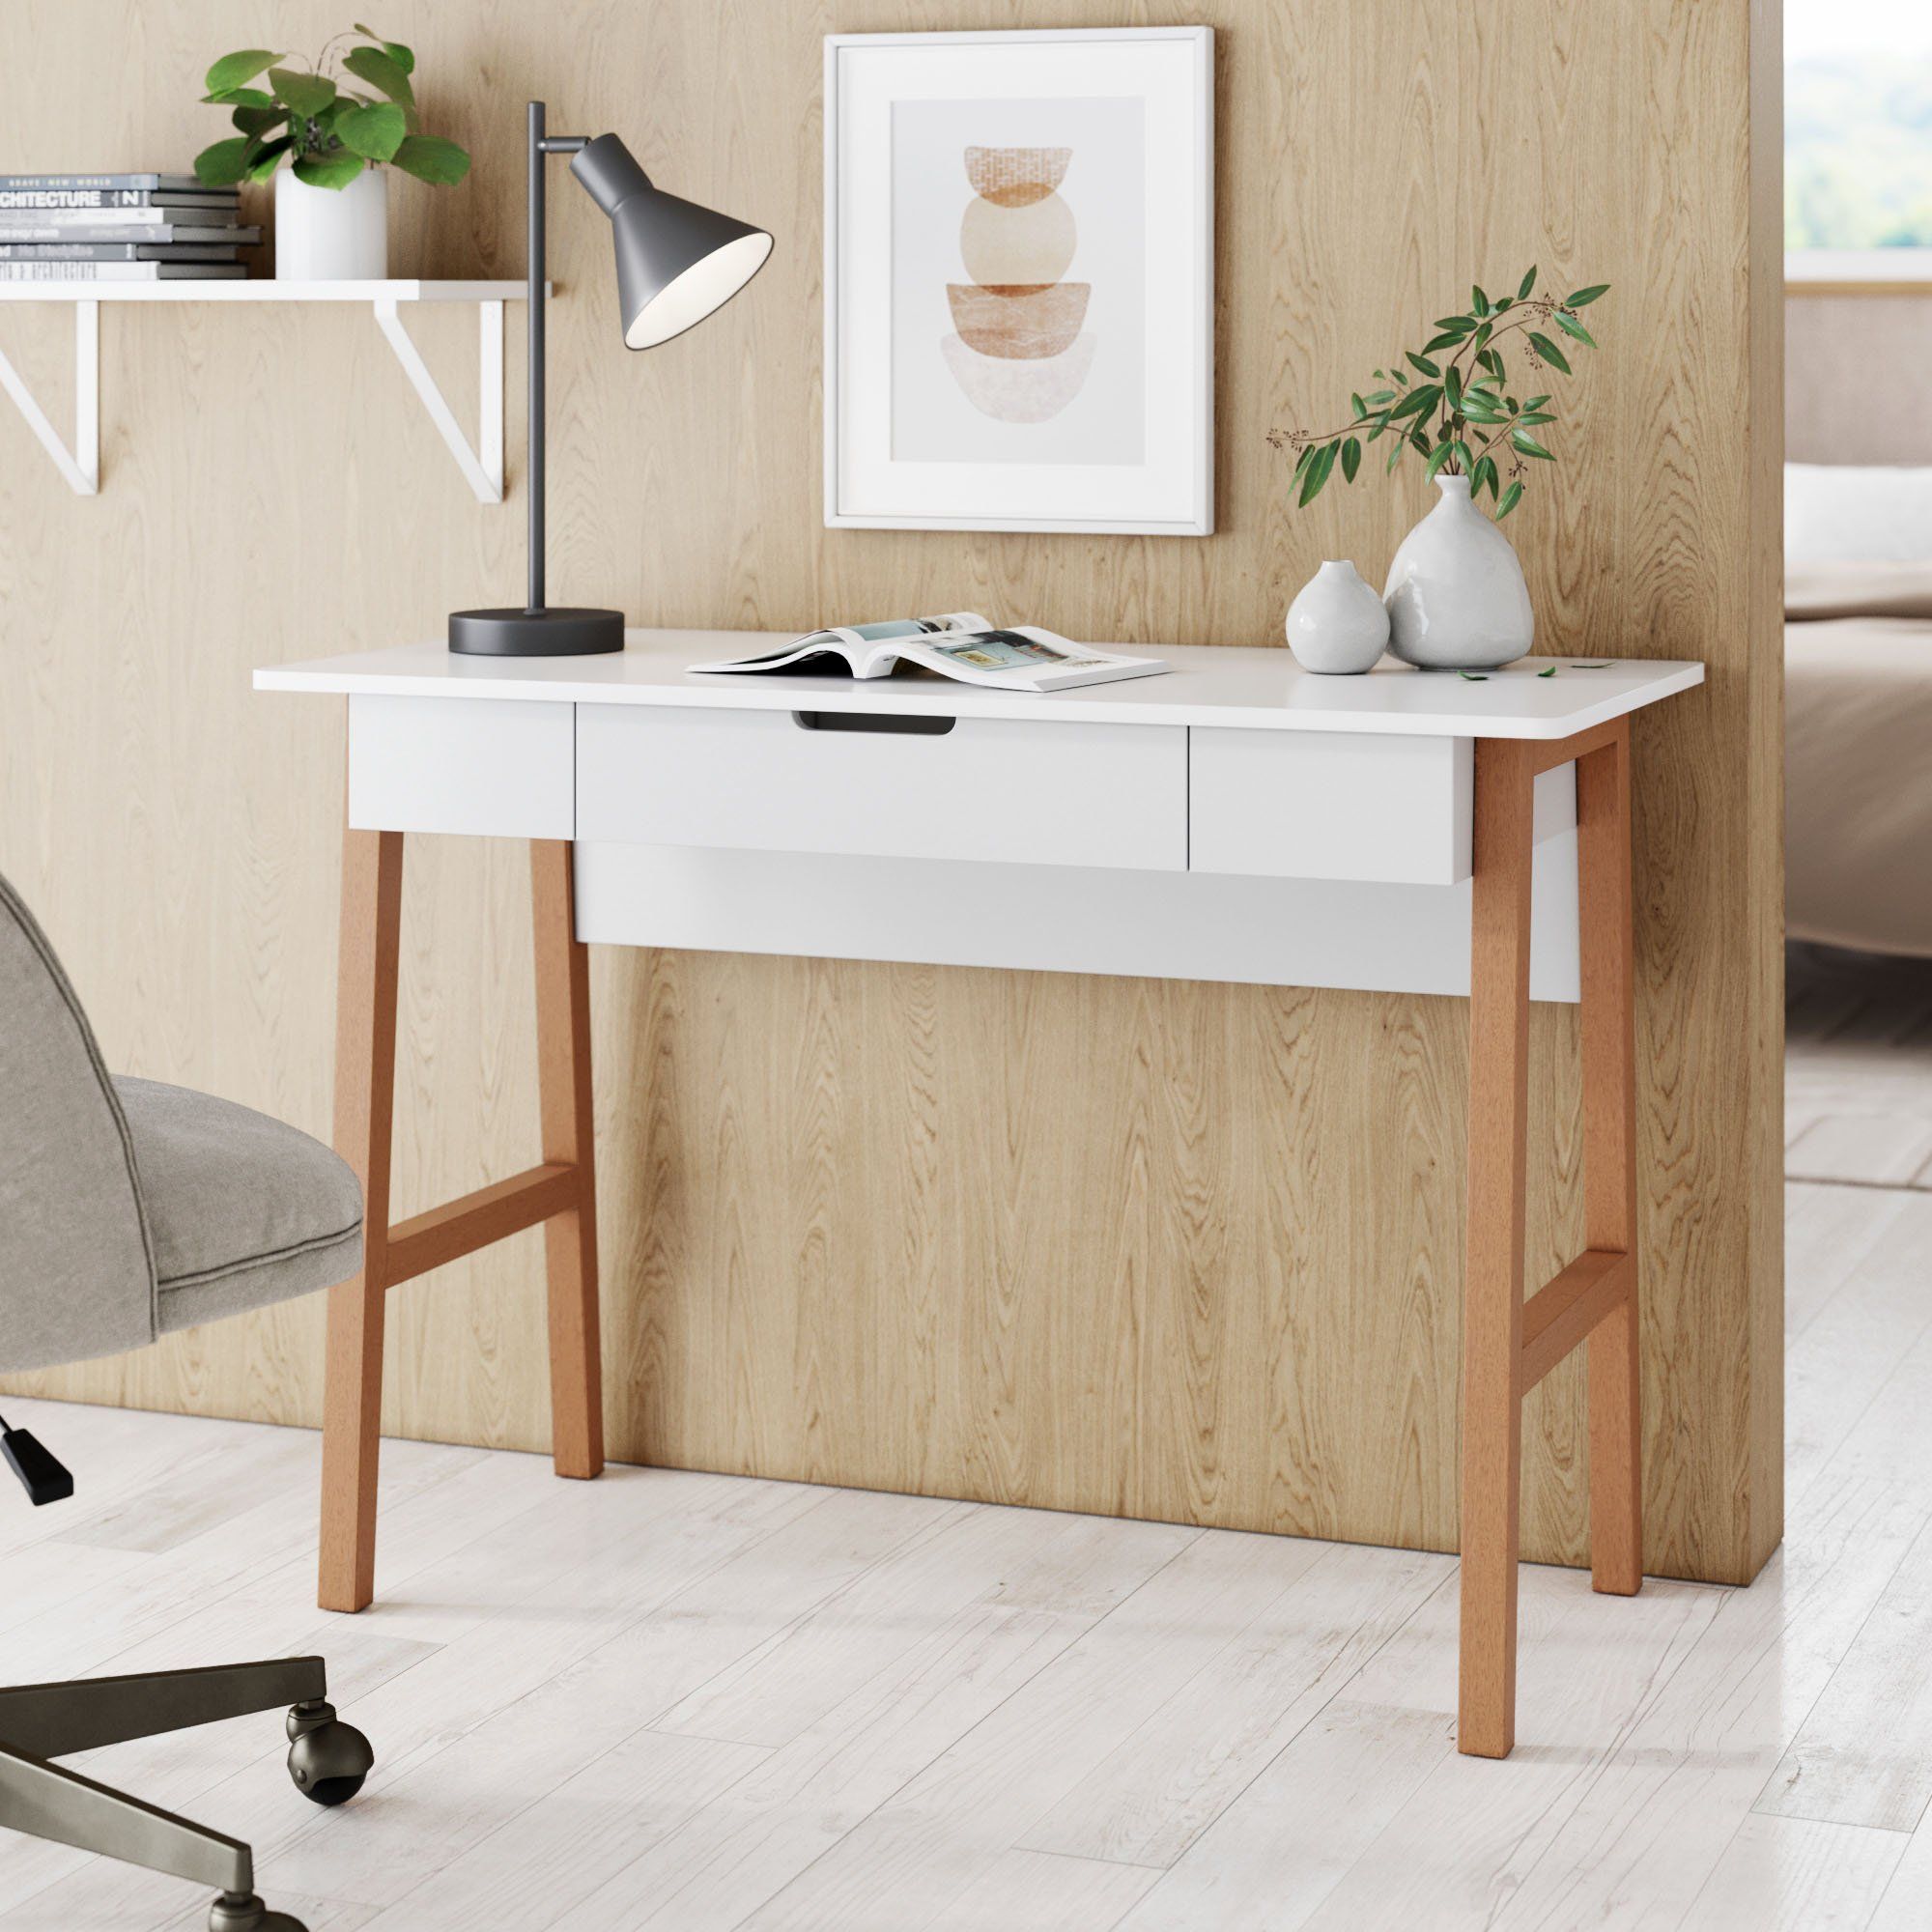 Nathan James Telos Home Office Computer Desk With Drawer White Modern In White Finish Office Study Work Desks (View 11 of 15)